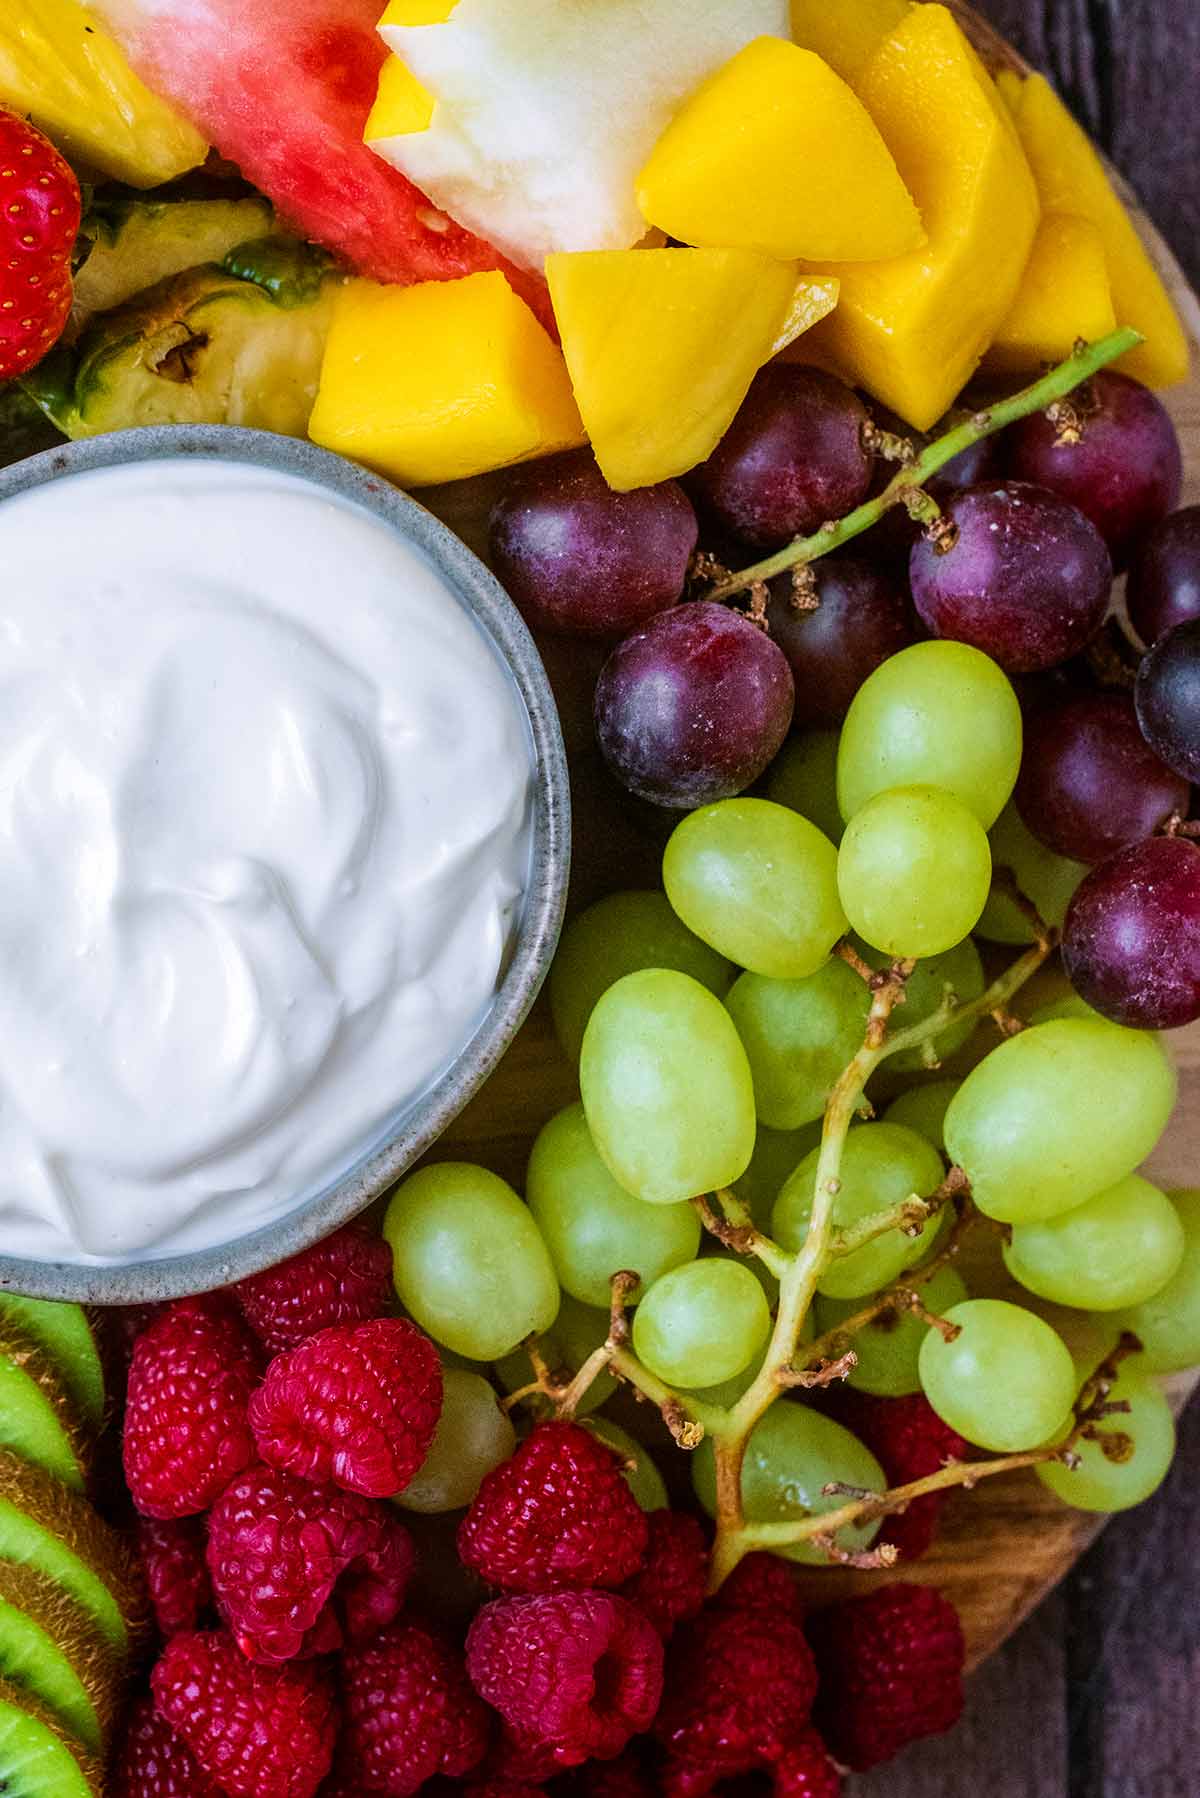 Red and green grapes, raspberries and sliced kiwi next to a bowl of creamy dip.